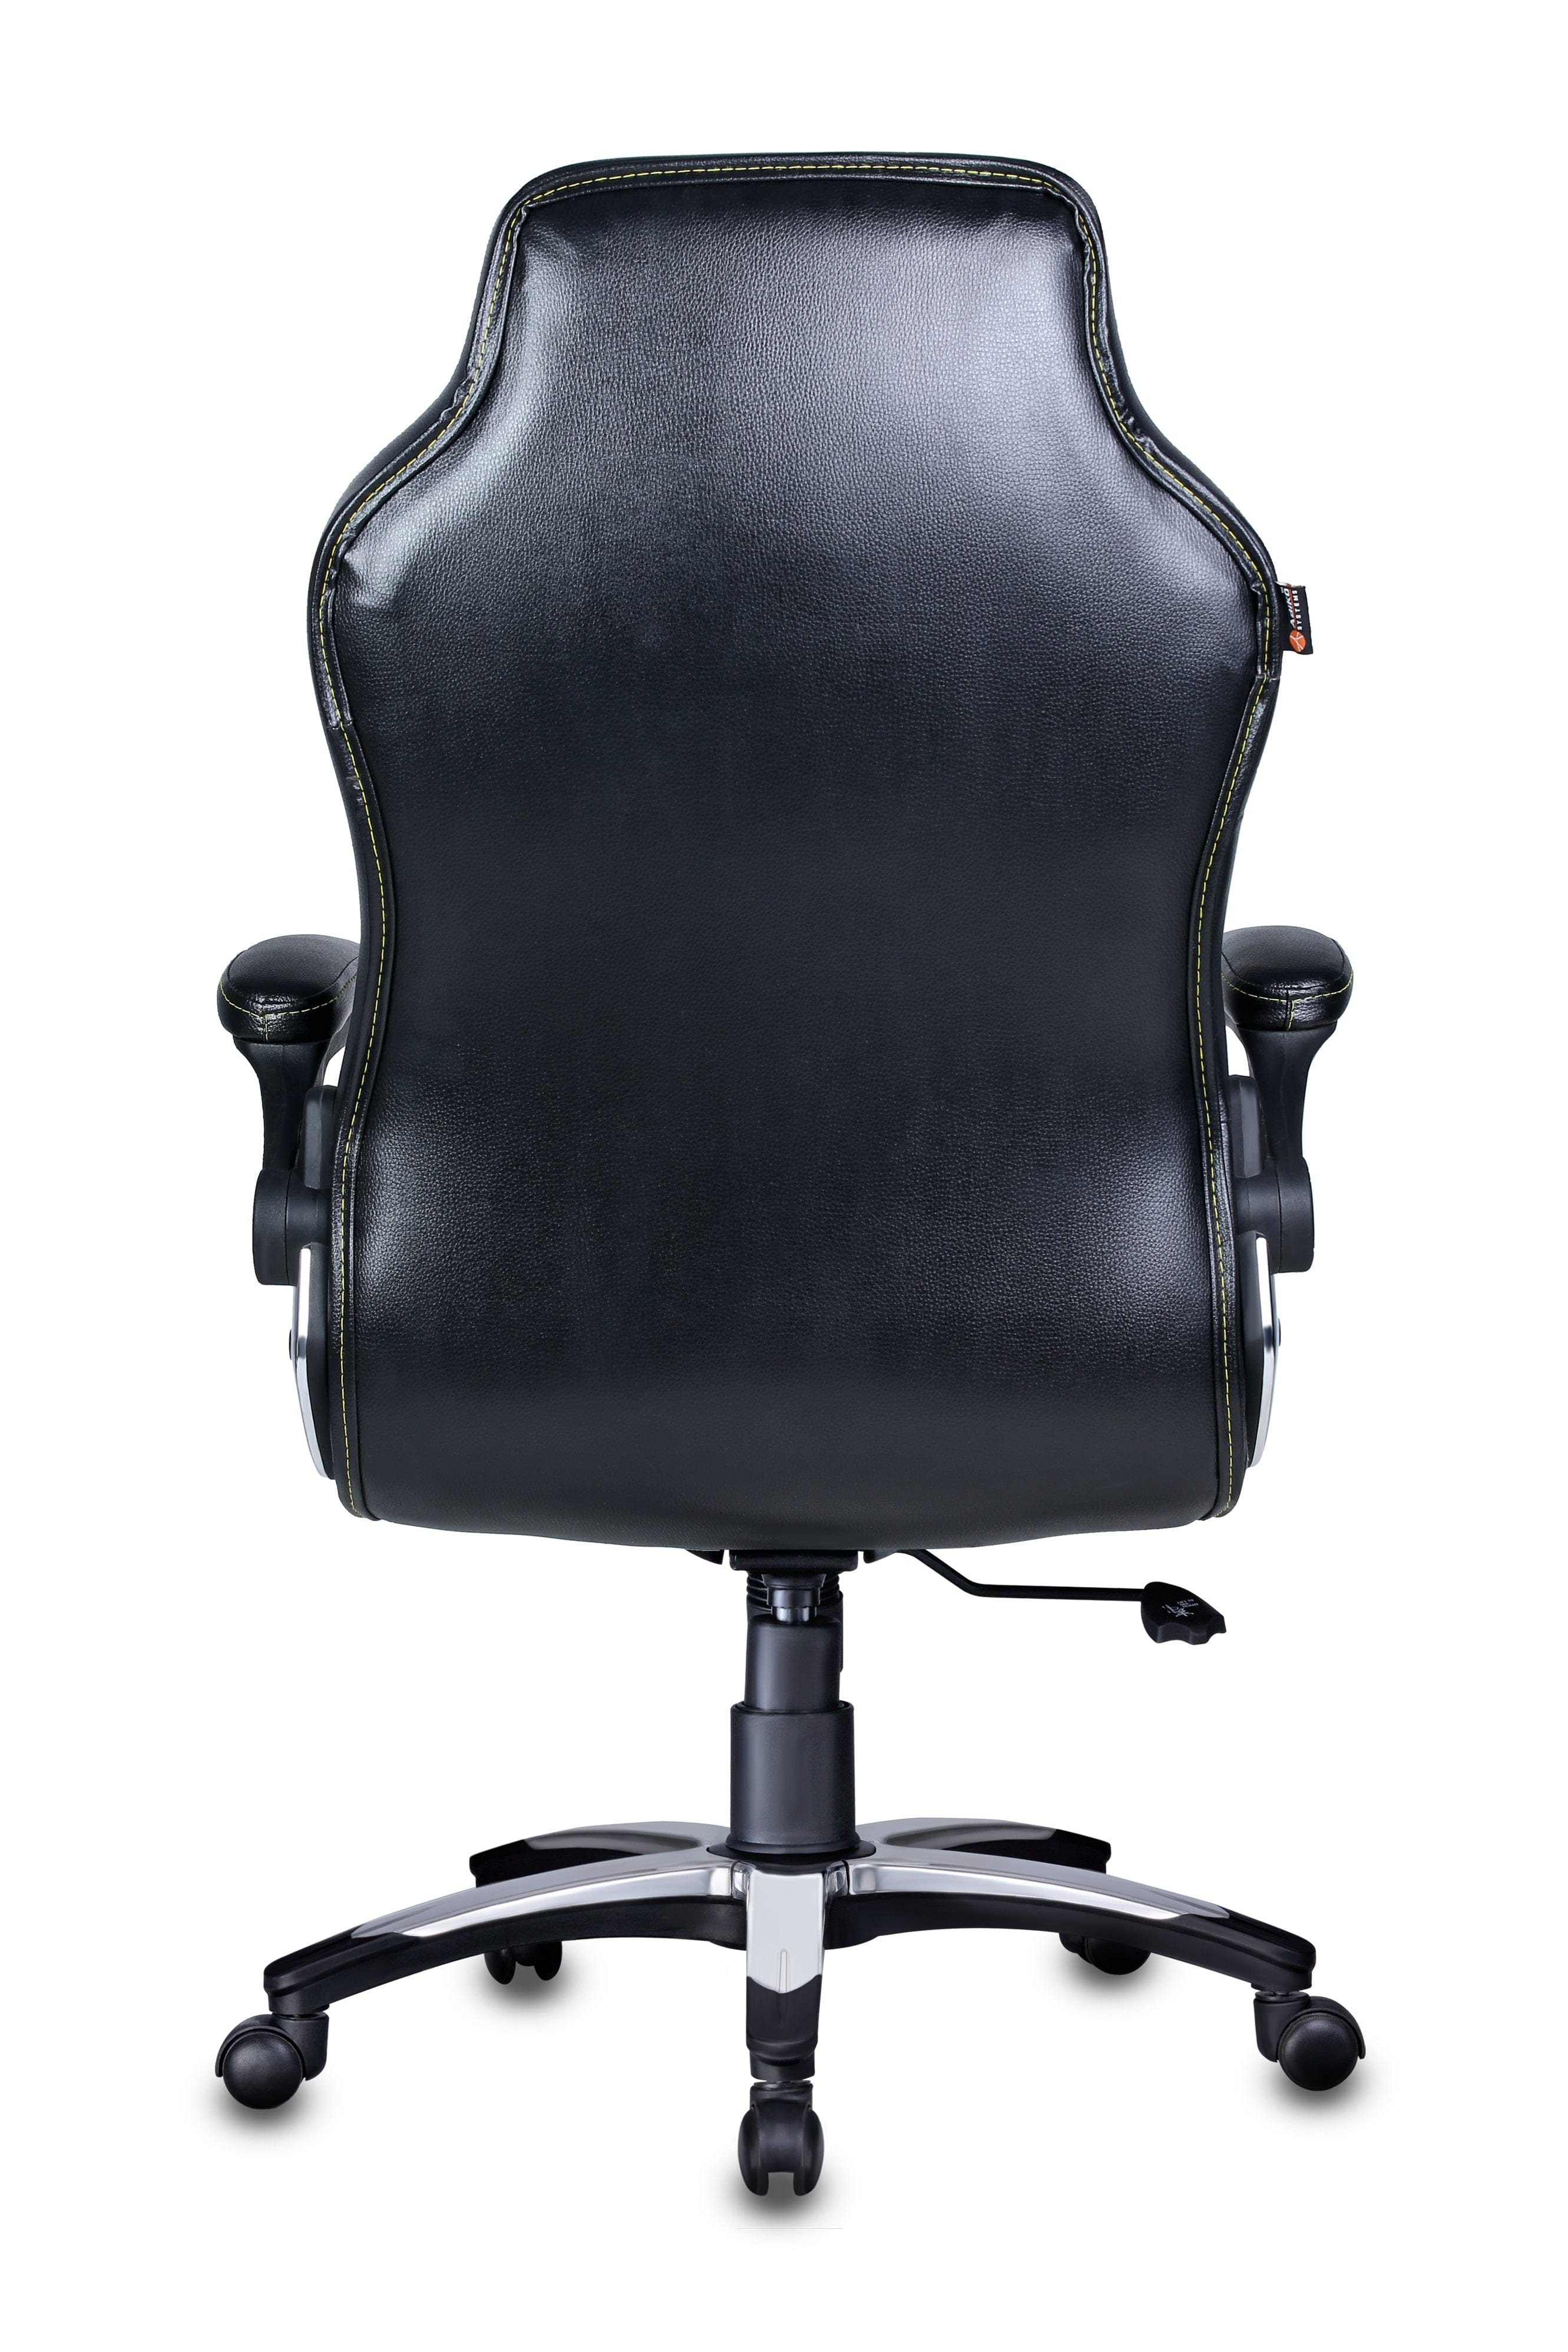 Smart Executive Chair in Black Colour by Adiko Systems